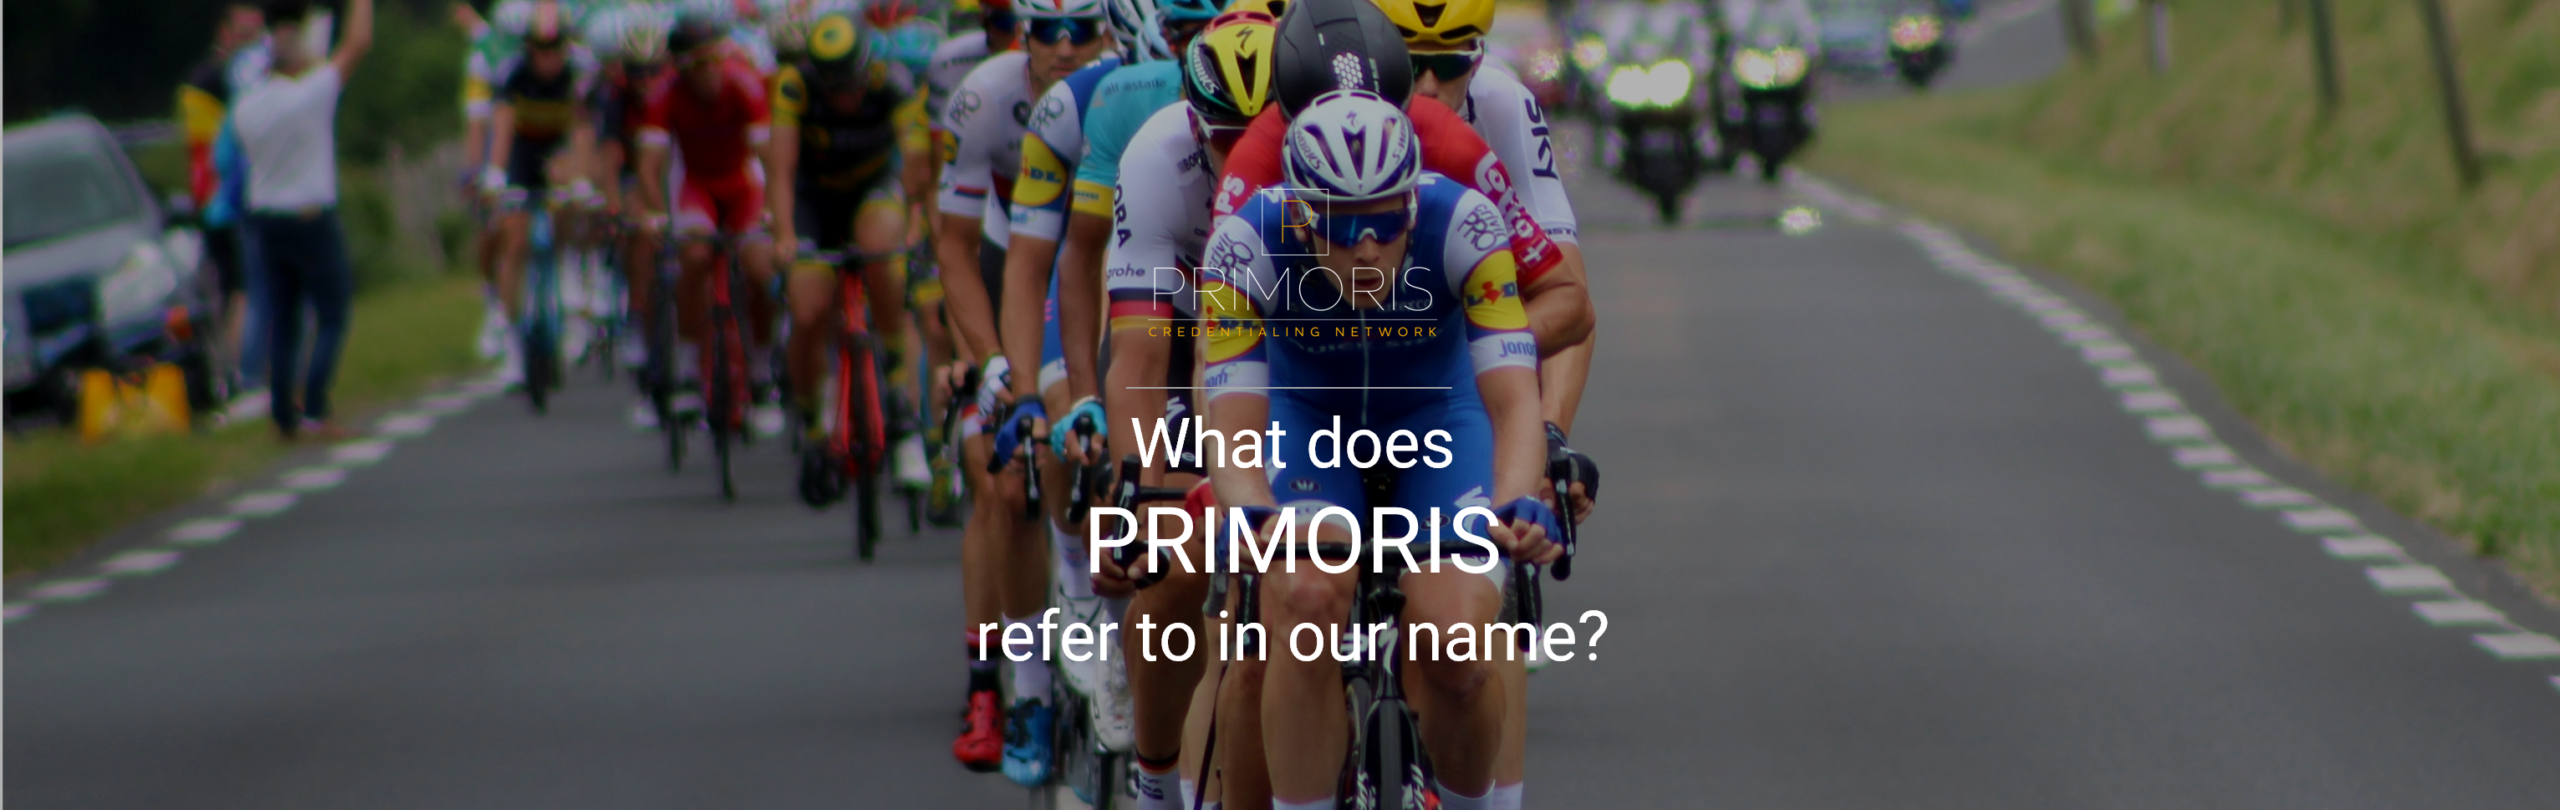 What does Primoris refer to in our name Primoris Credentialing Network?